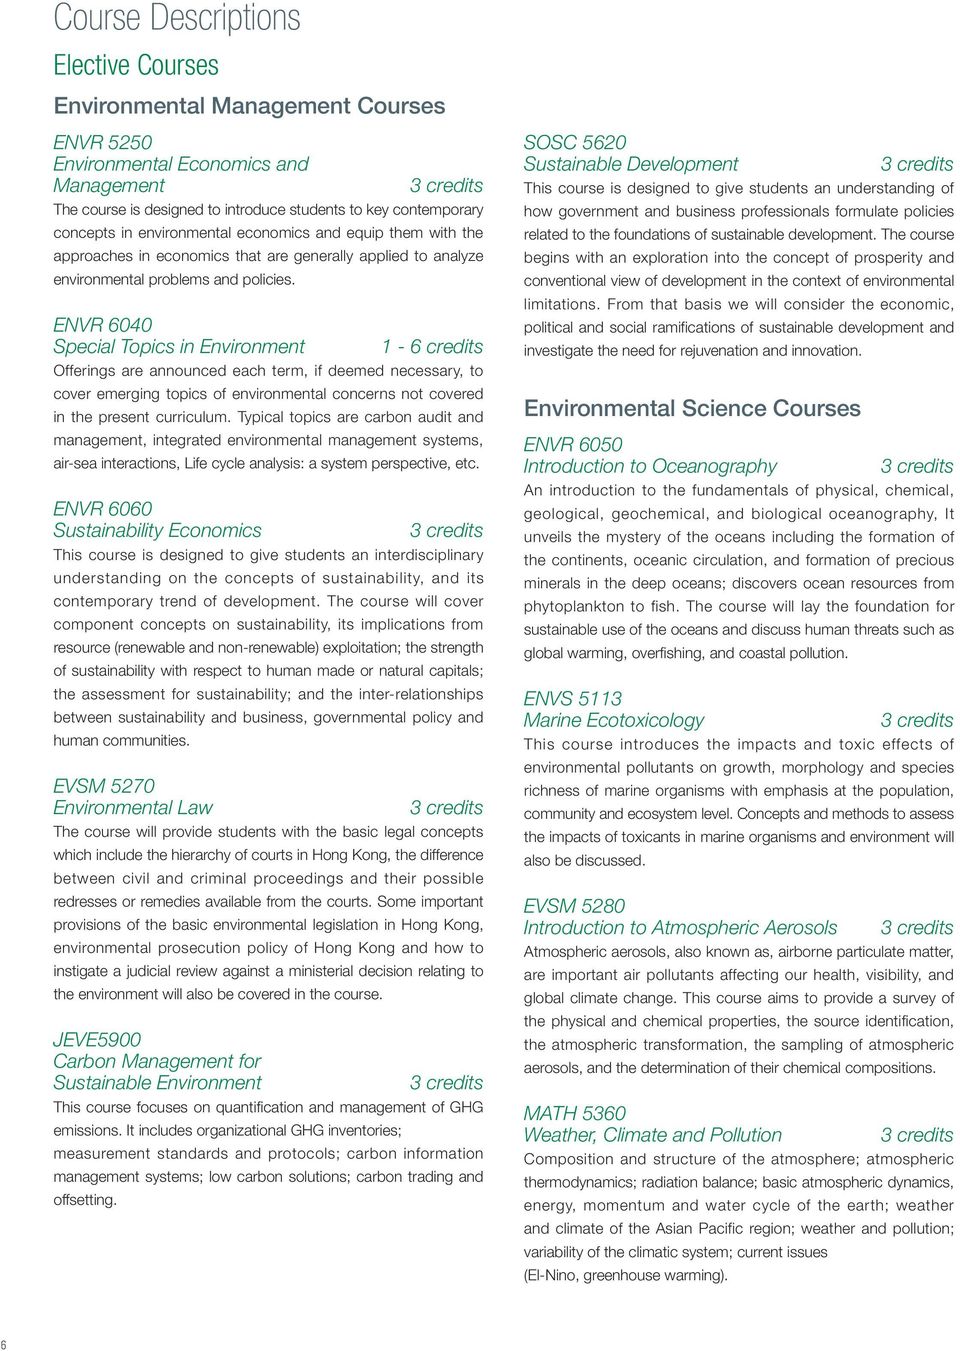 ENVR 6040 Special Topics in Environment 1-6 credits Offerings are announced each term, if deemed necessary, to cover emerging topics of environmental concerns not covered in the present curriculum.